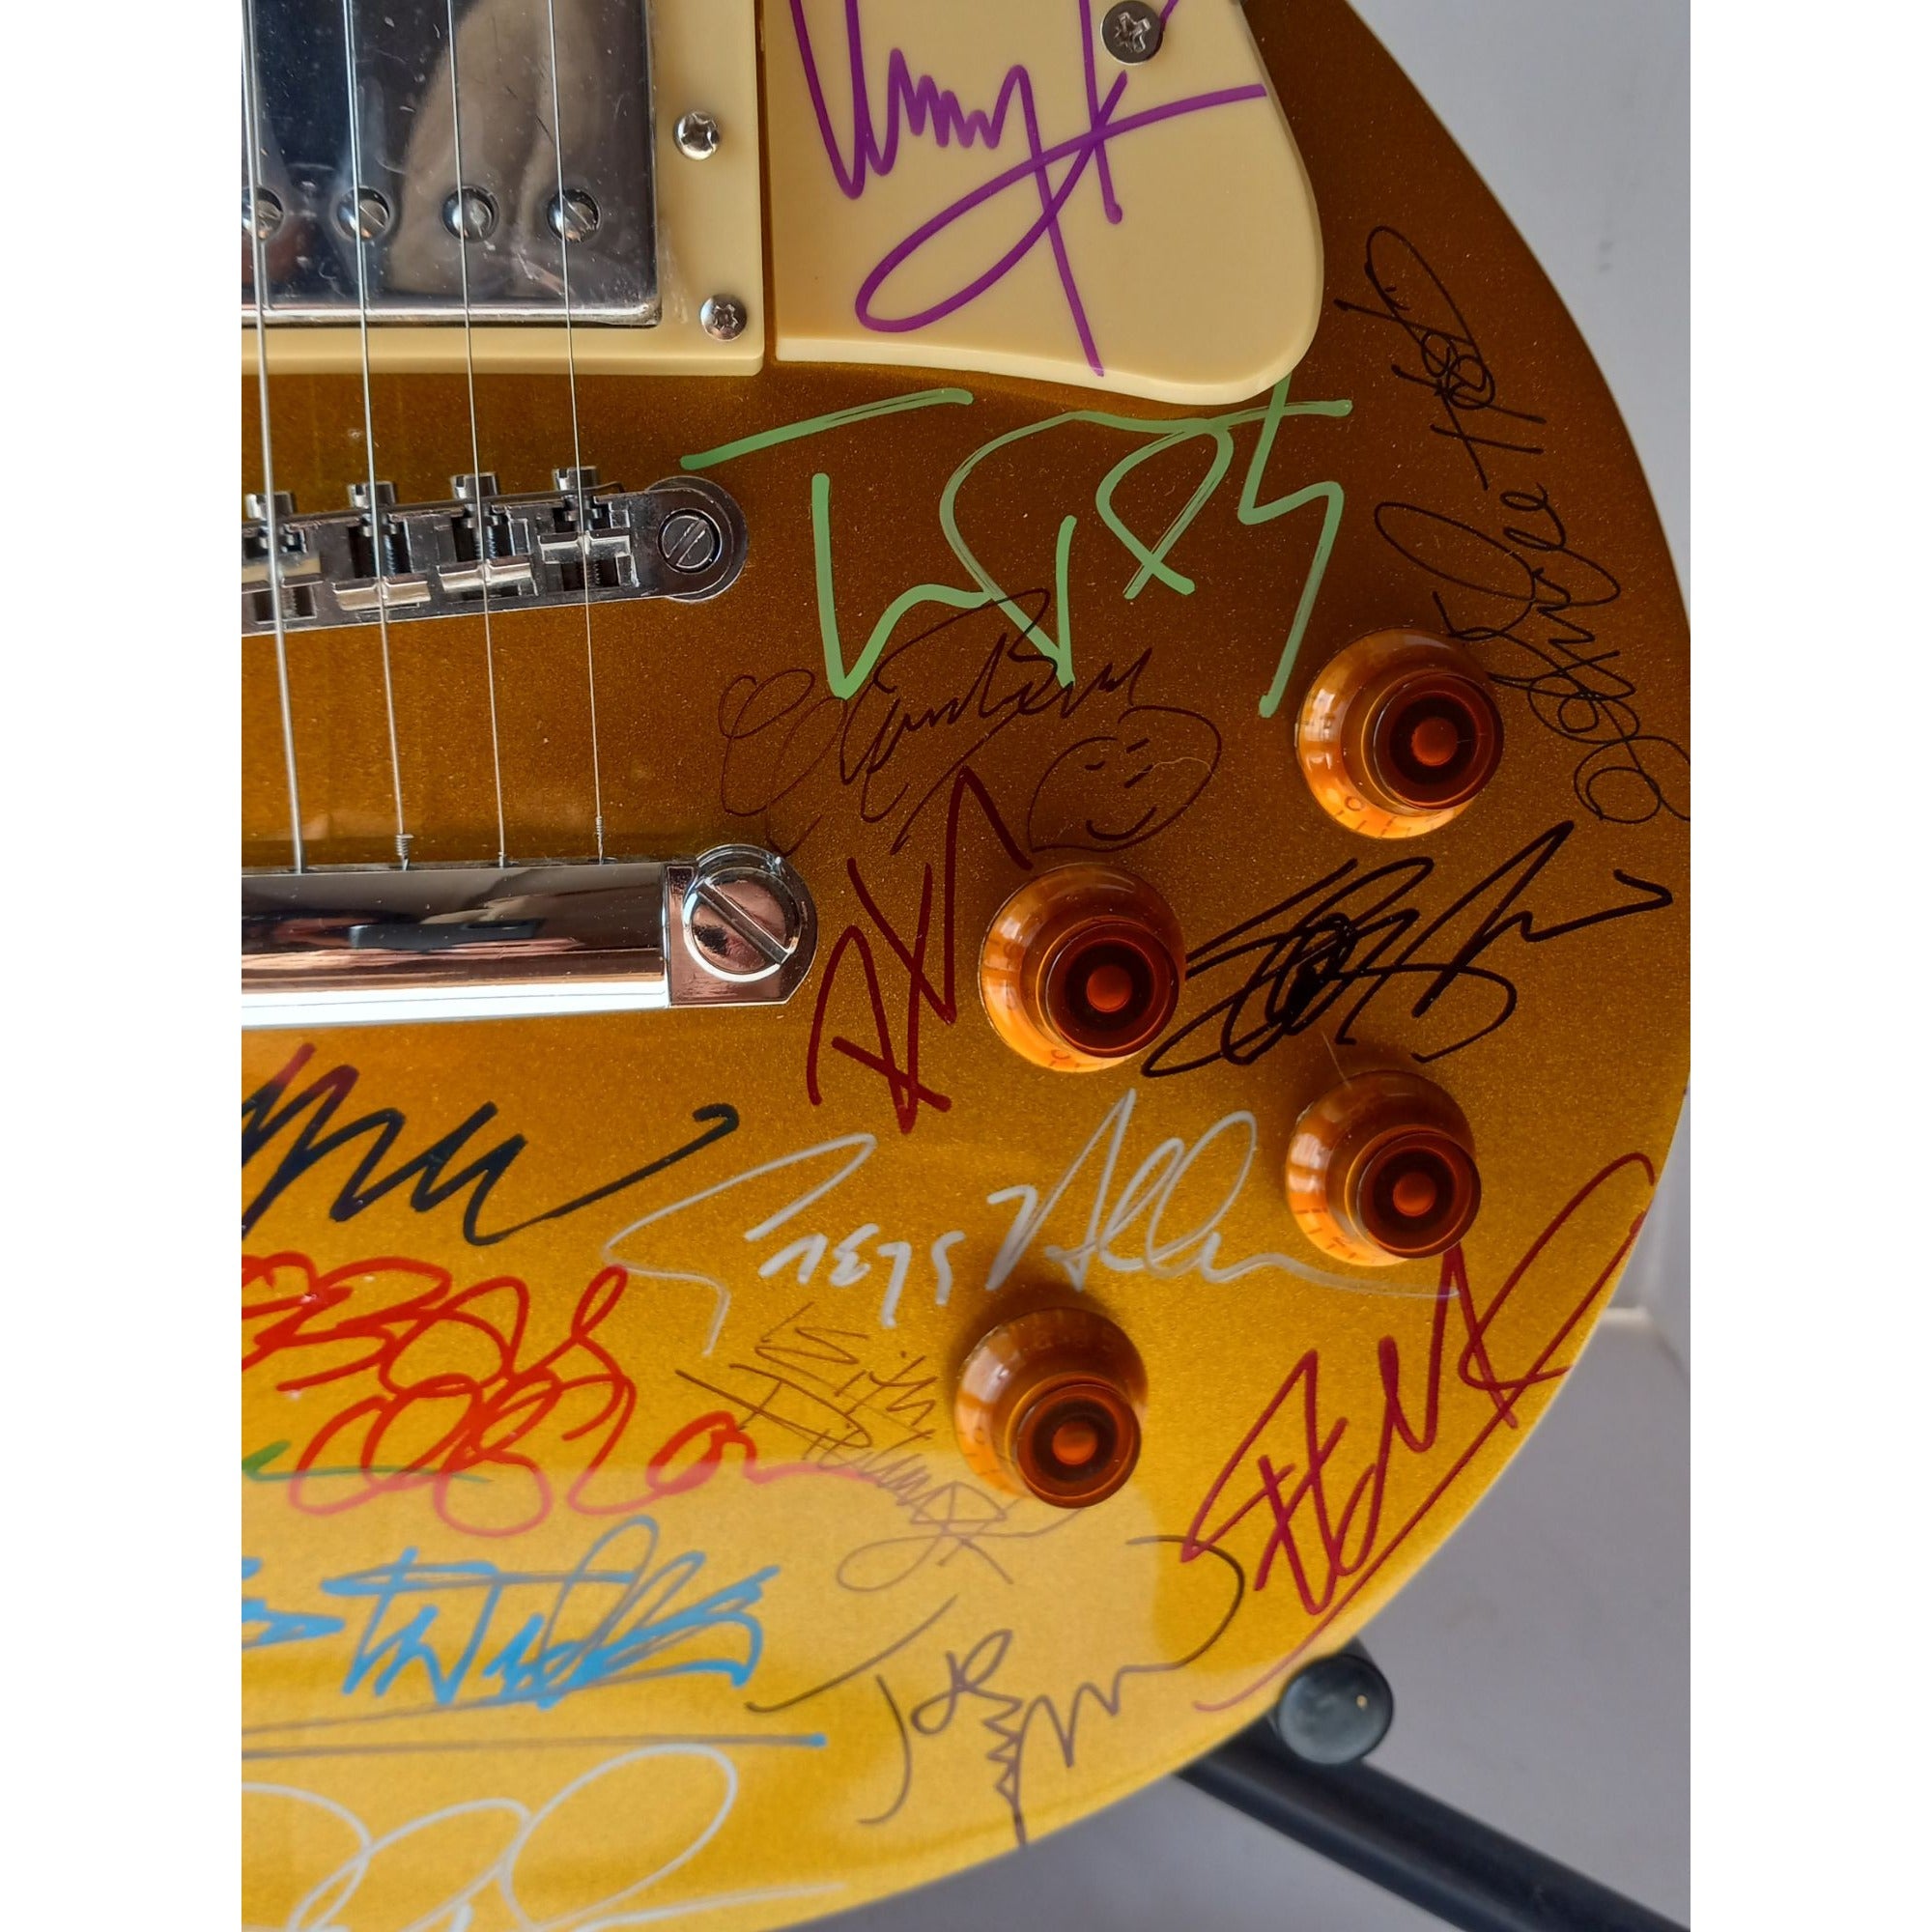 Paul McCartney Eric Clapton David Bowie Jimmy Page 33 Legend signed Gibson Les Paul guitar with proof